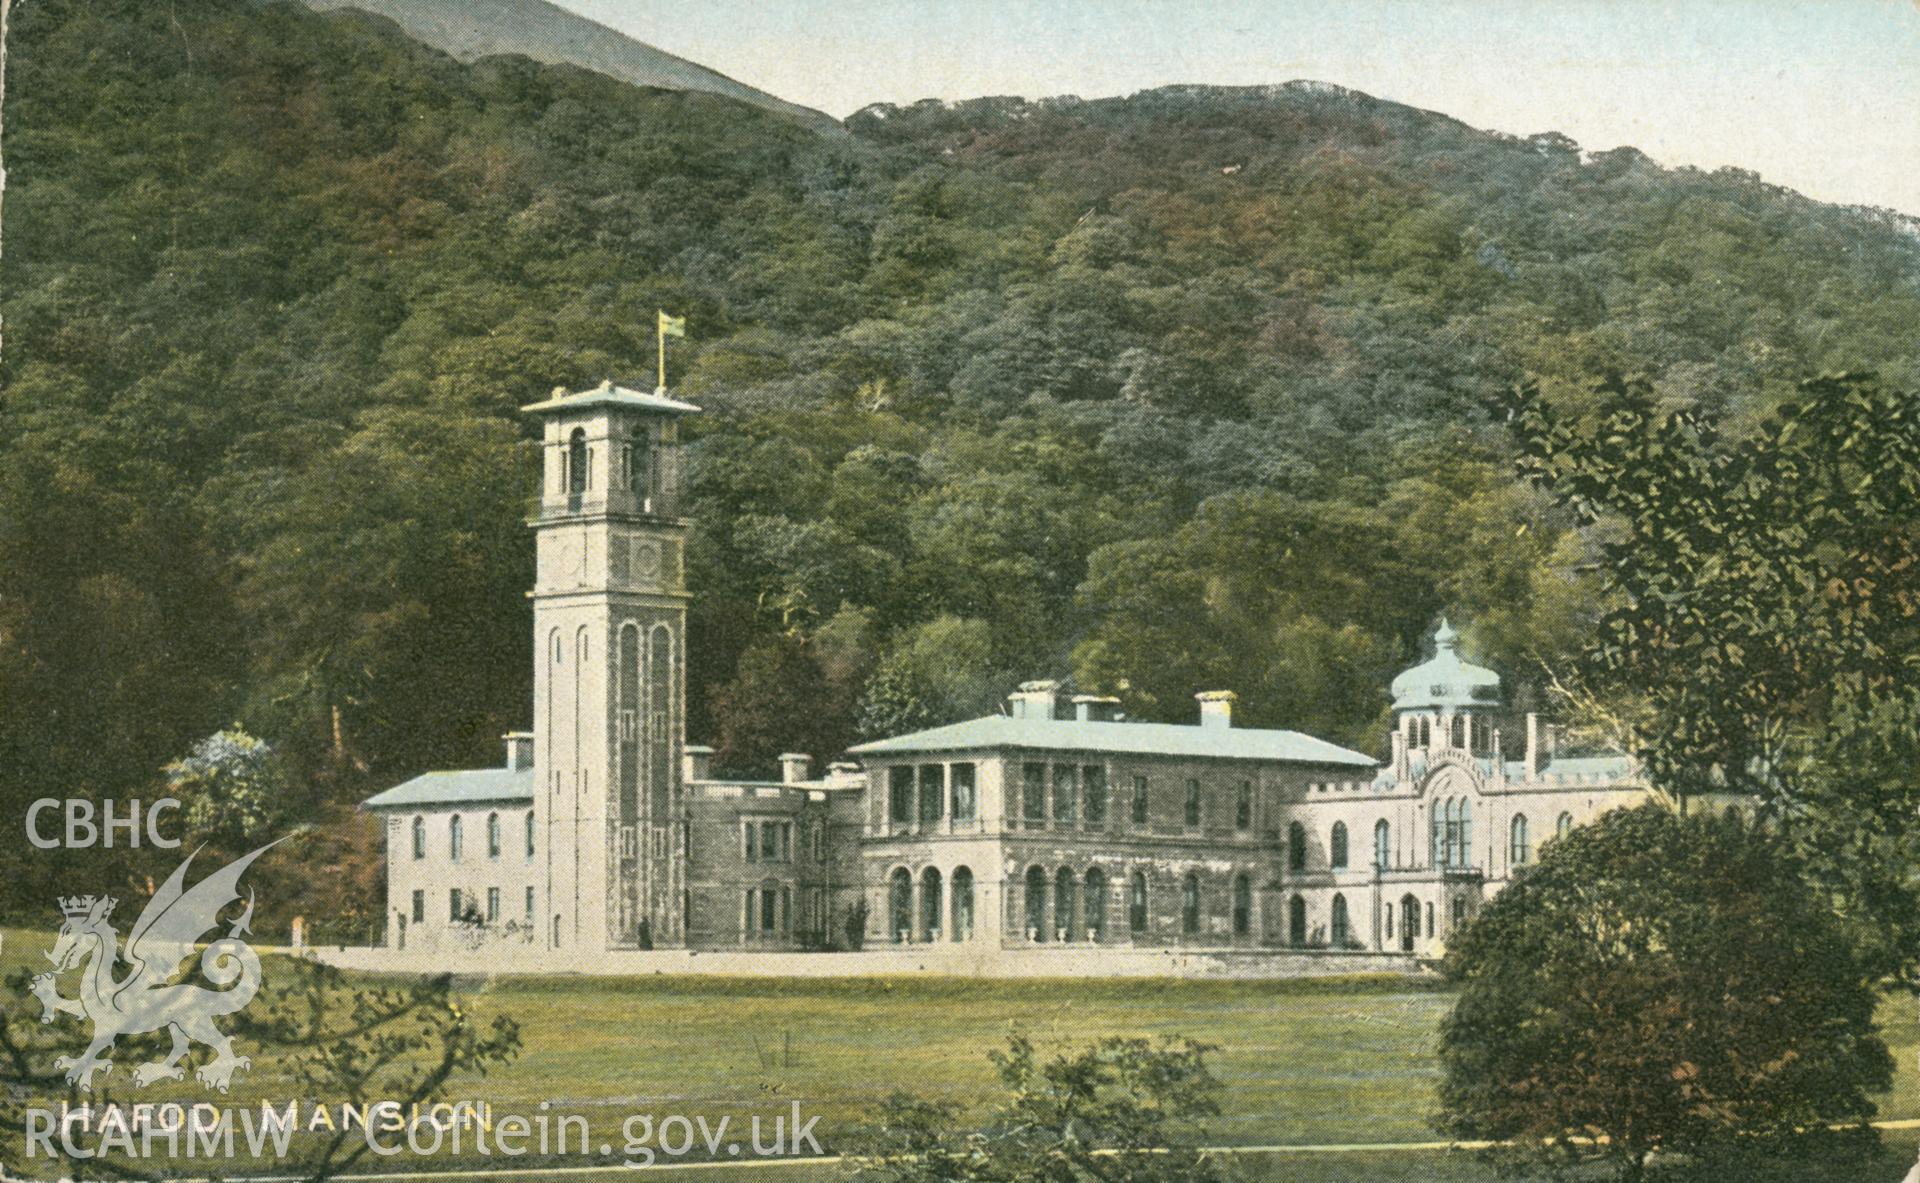 A black and white print of a colour postcard showing Hafod Mansion, Pontrhydygroes.